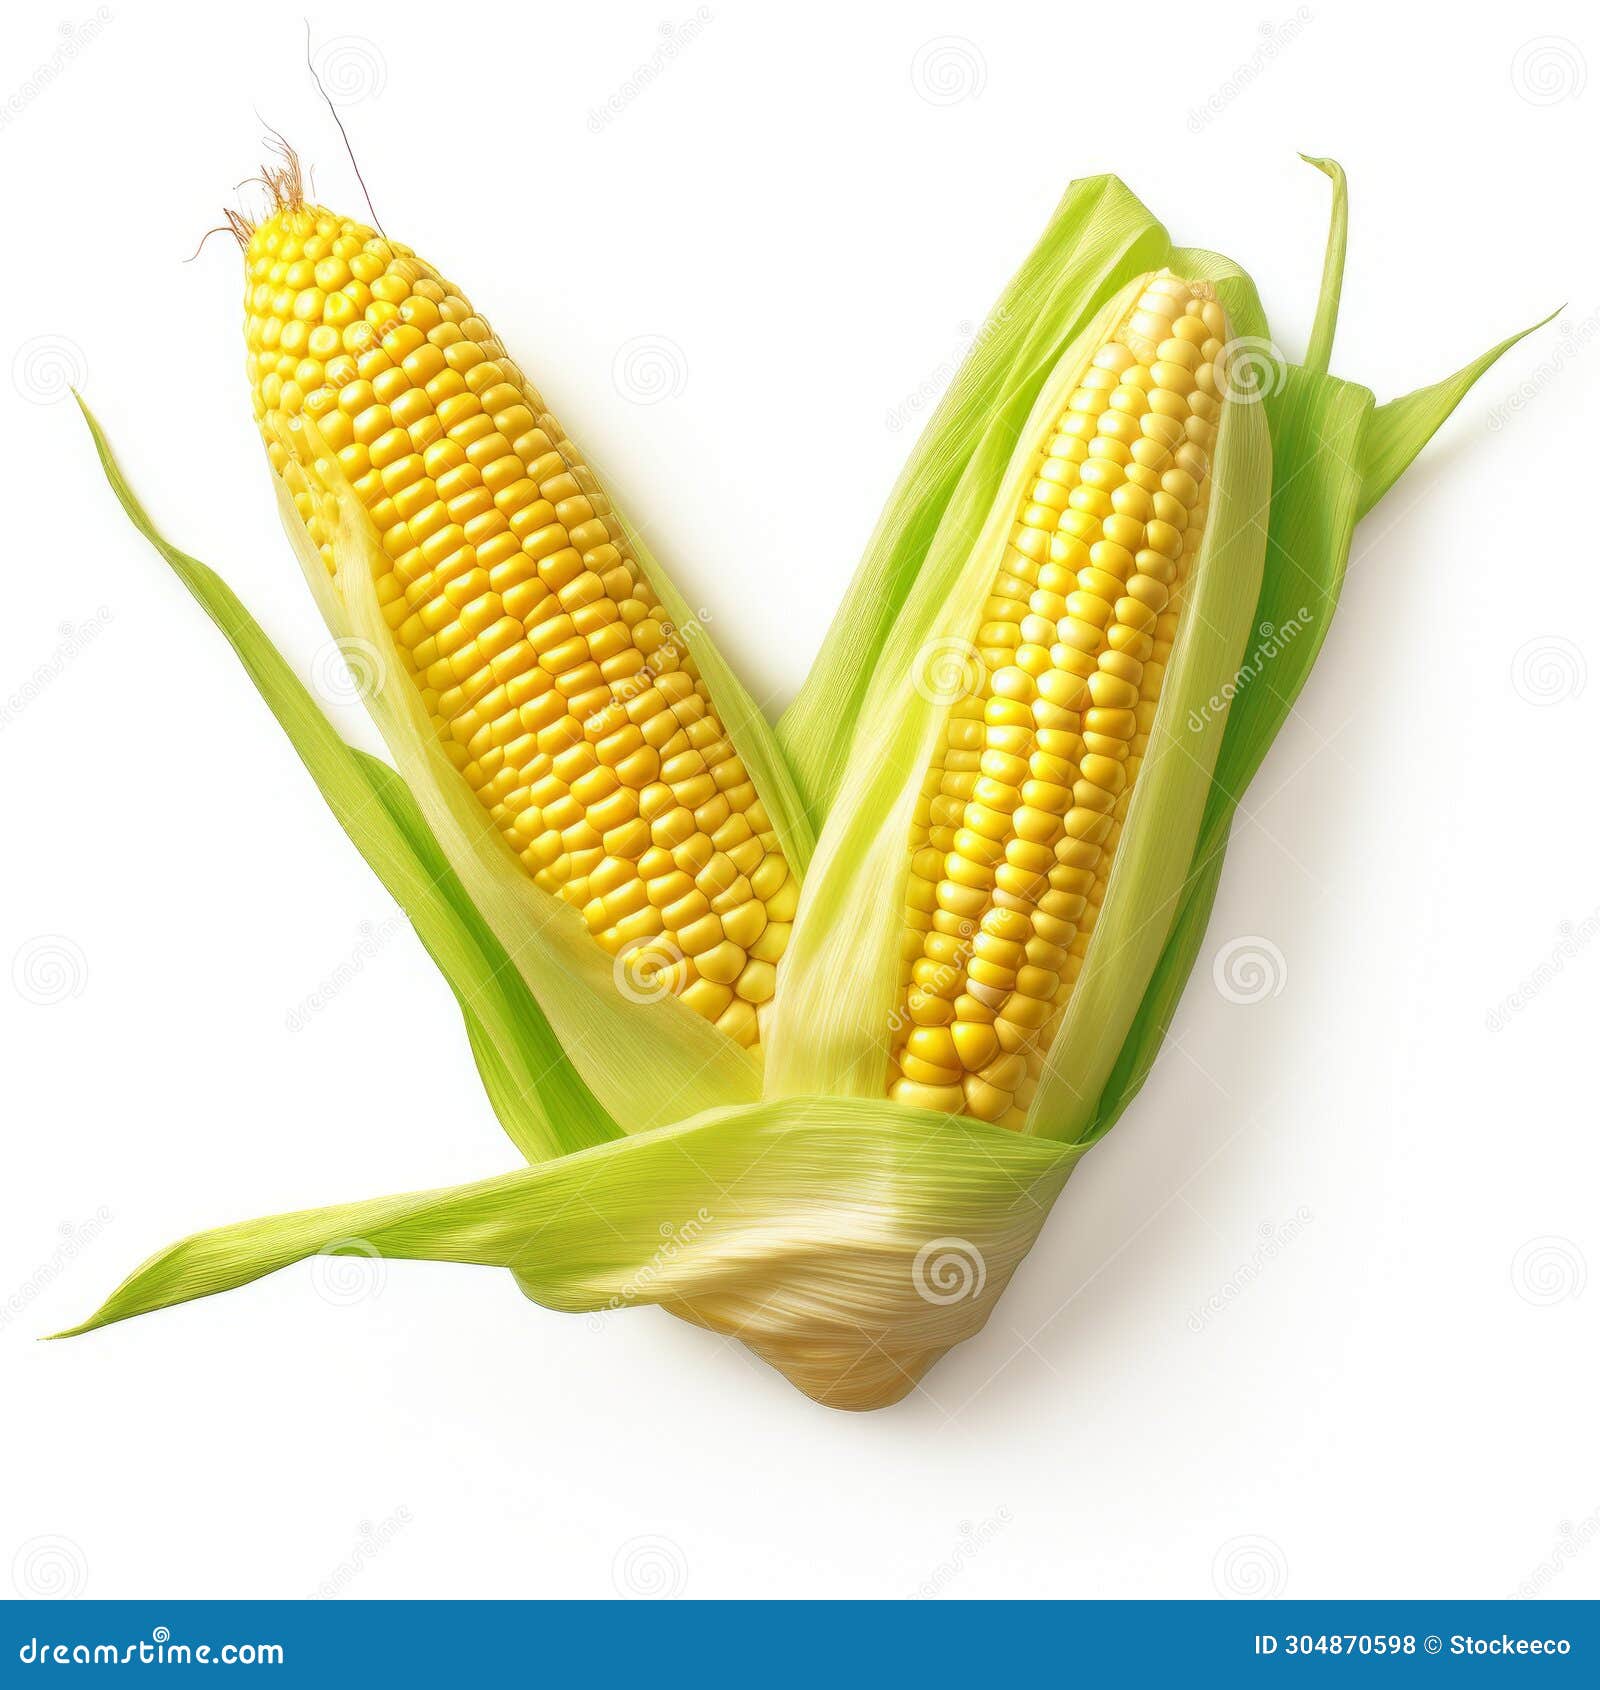 colorized corn: a playful and vibrant photo of freshly picked ears